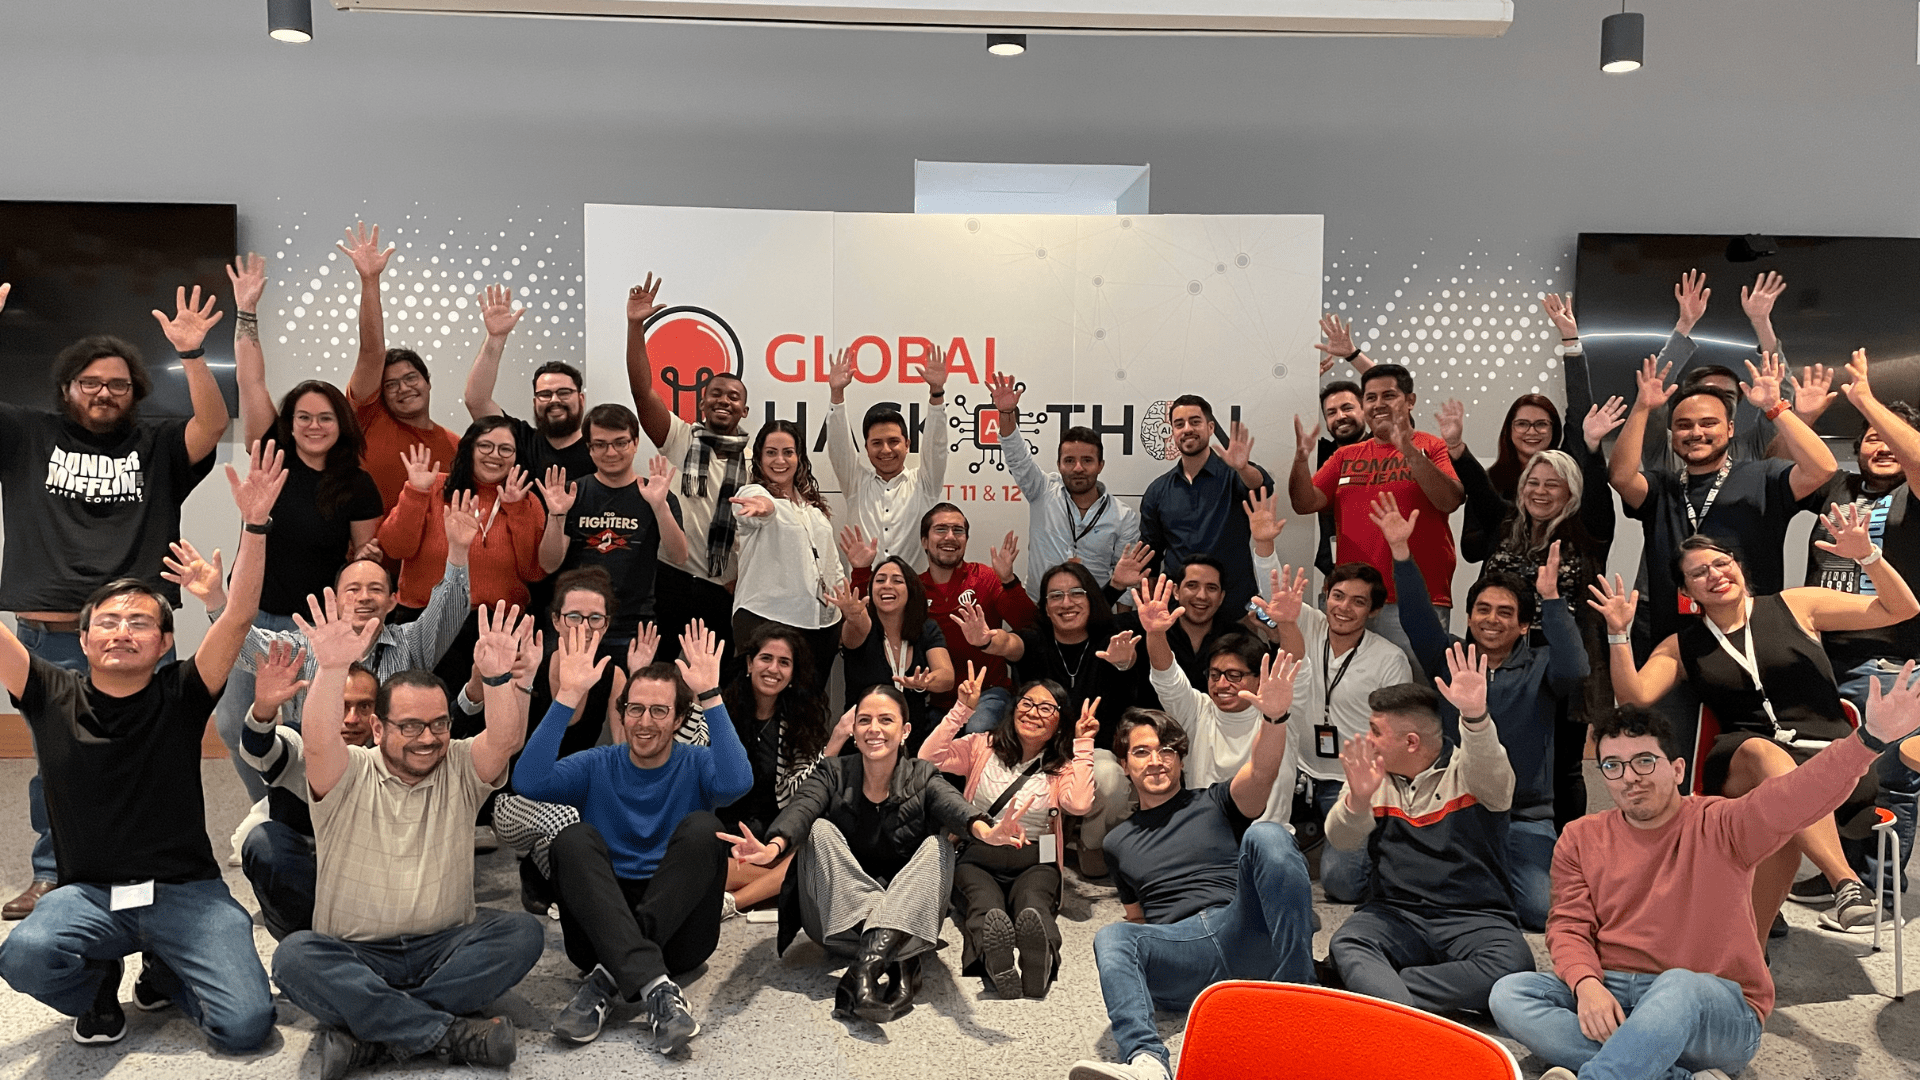 A large group of teammates pose for a photo together during the Global AI hackathon.